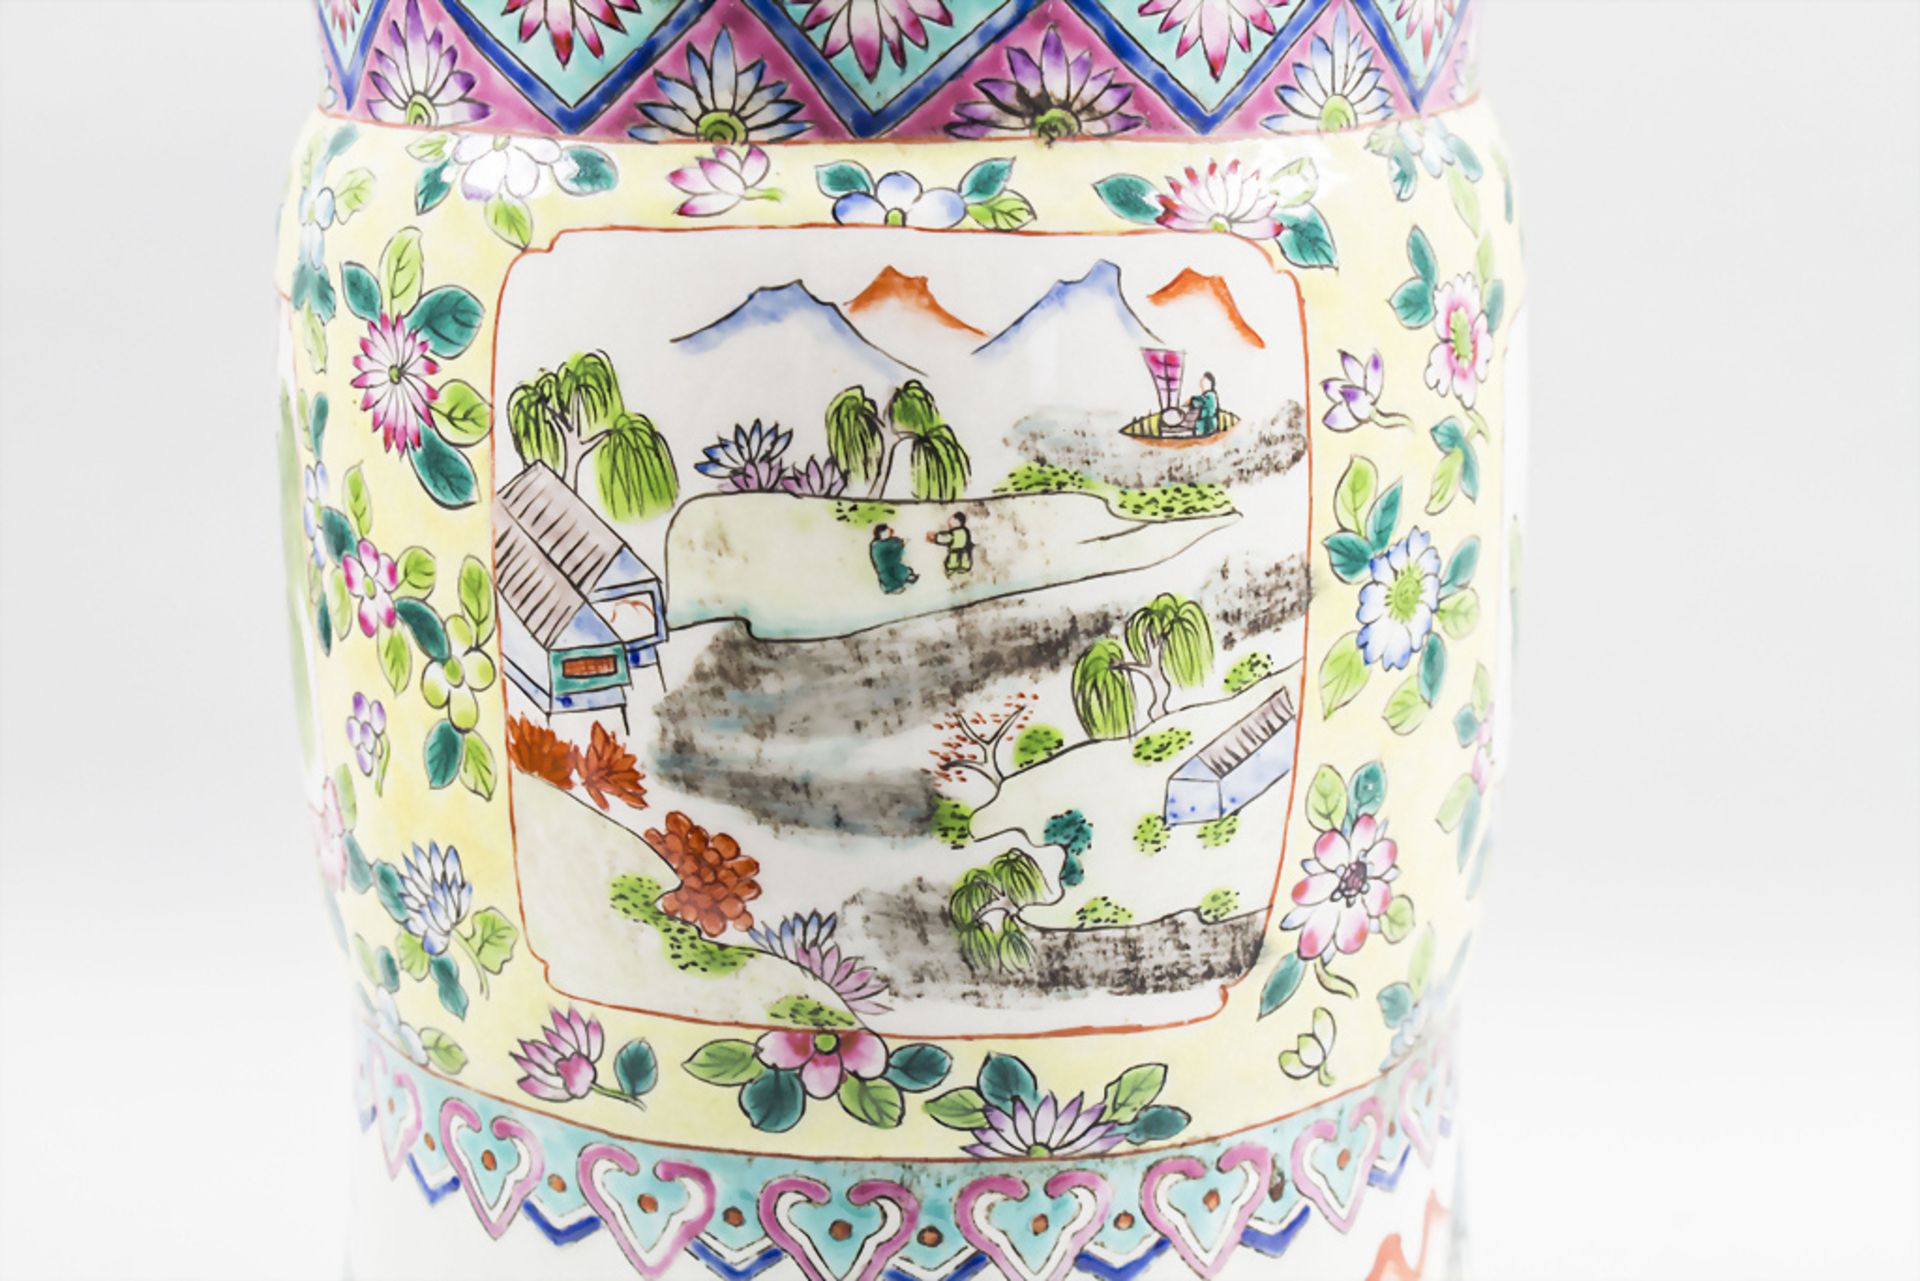 Große Gu Bodenvase / A large Gu vase, wohl Qing-Periode, China - Image 7 of 10